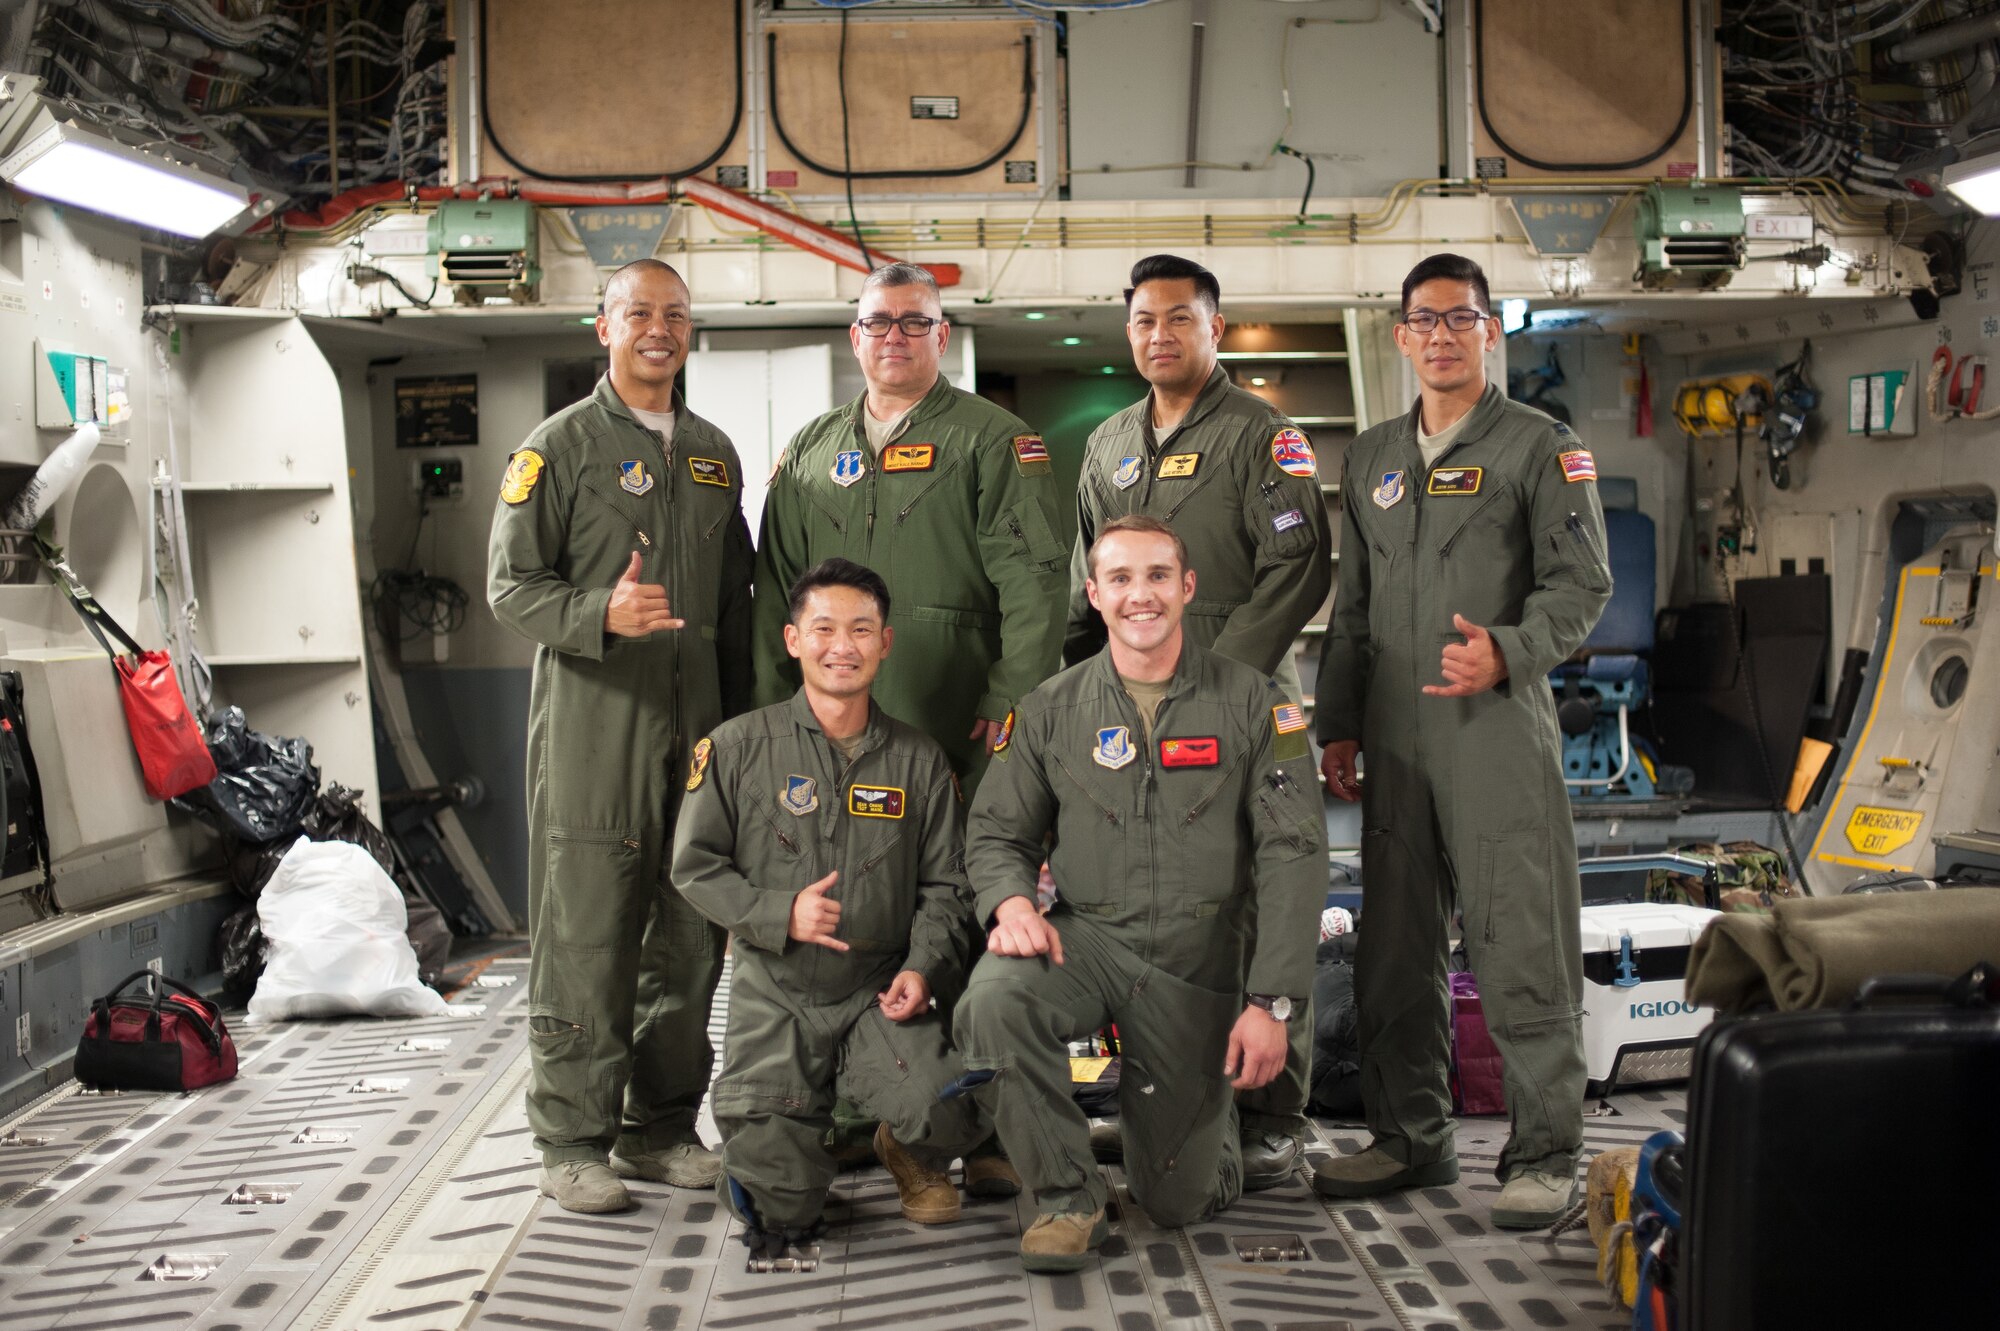 204th Airlift Squadron Airmen, Master Sgt. Brandon Sarceda, Senior Master Sgt. Kale Barney, Maj. Kalei Ho’opai, Capt. Justin Sato, Tech. Sgt. Sean Chang, and a member of the 535th AS, 1st Lt. Andrew Lightsinn, celebrate their arrival at Joint Base Pearl Harbor-Hickam, Hawaii, March 31, after completing a 41-hour aeromedical-evacuation mission.